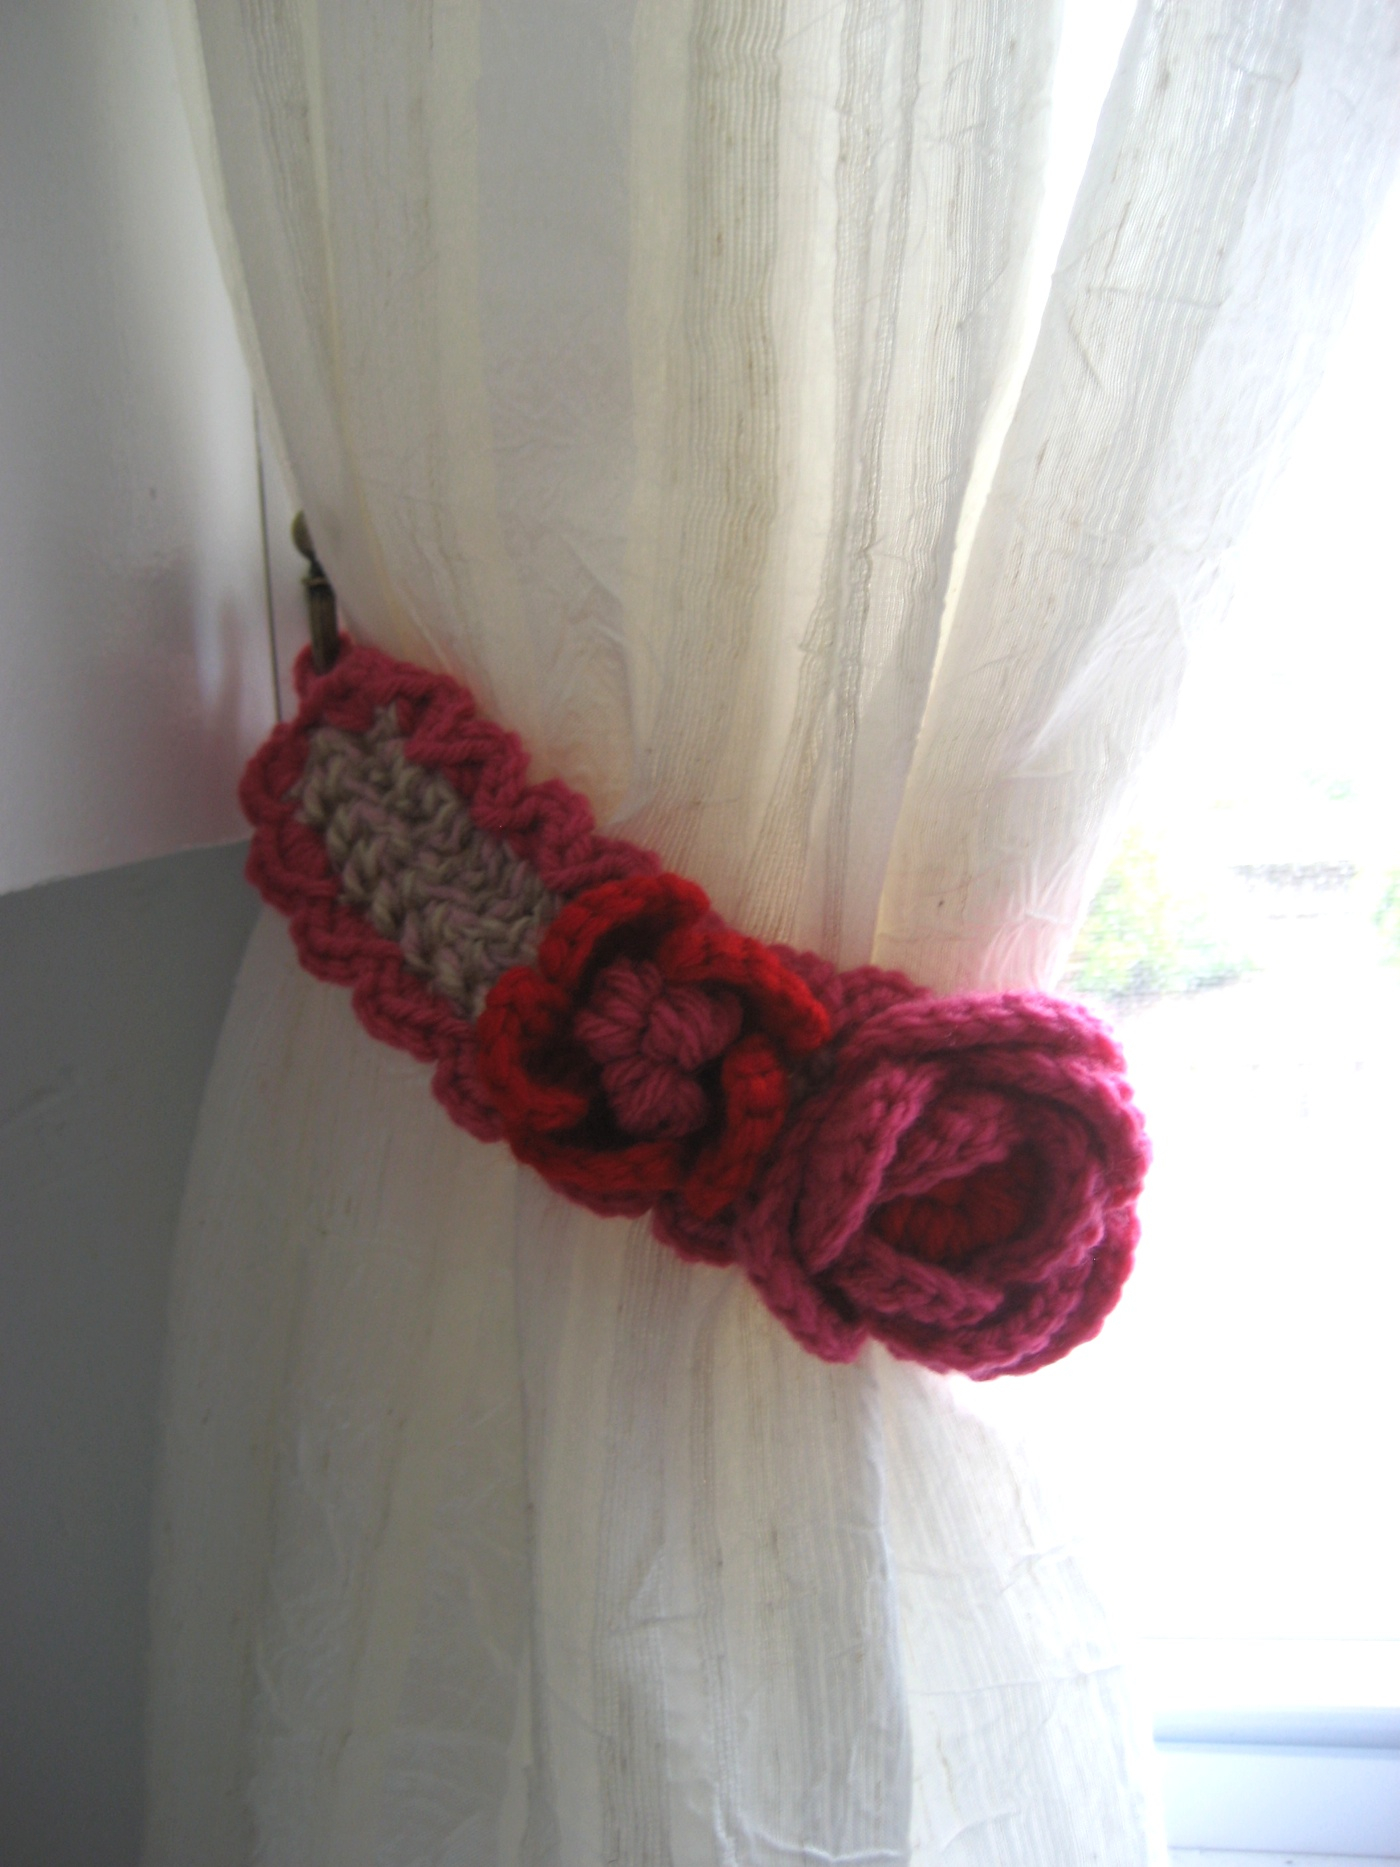 Crochet Curtain Patterns Kitschy Curtain Tie Backs Ms Premise Conclusion